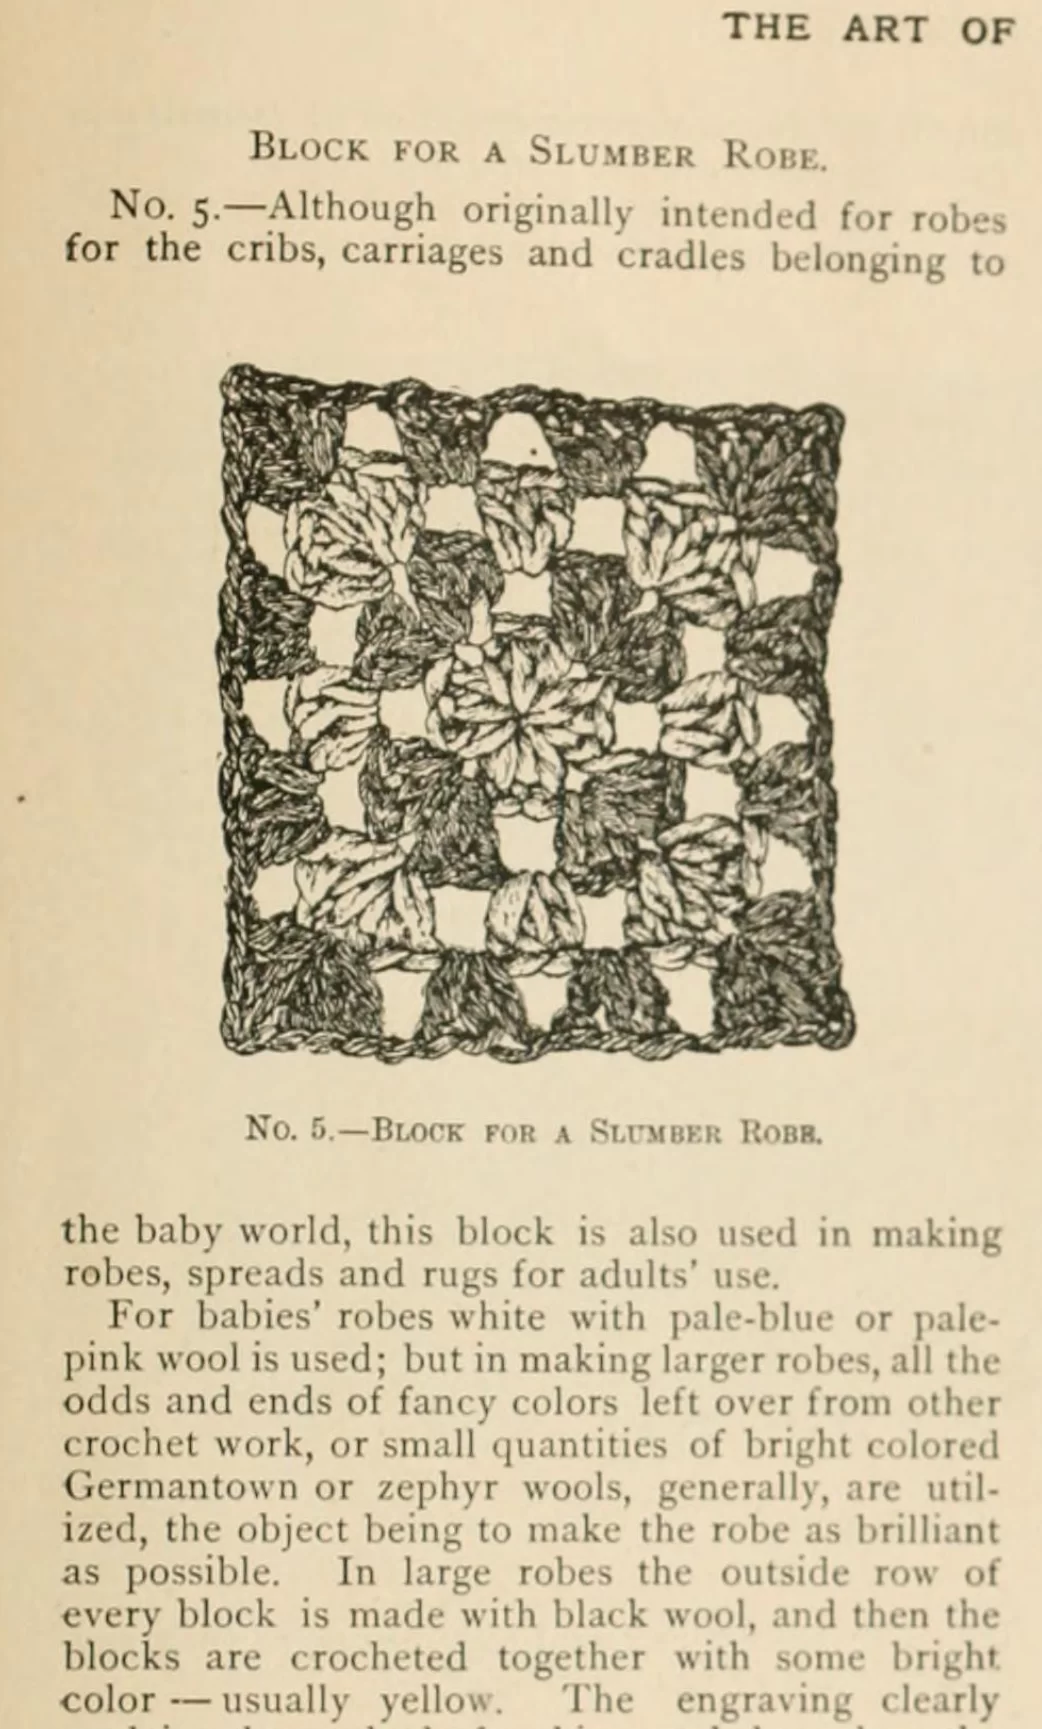 A Block for a Slumber Robe - The Art of Crocheting